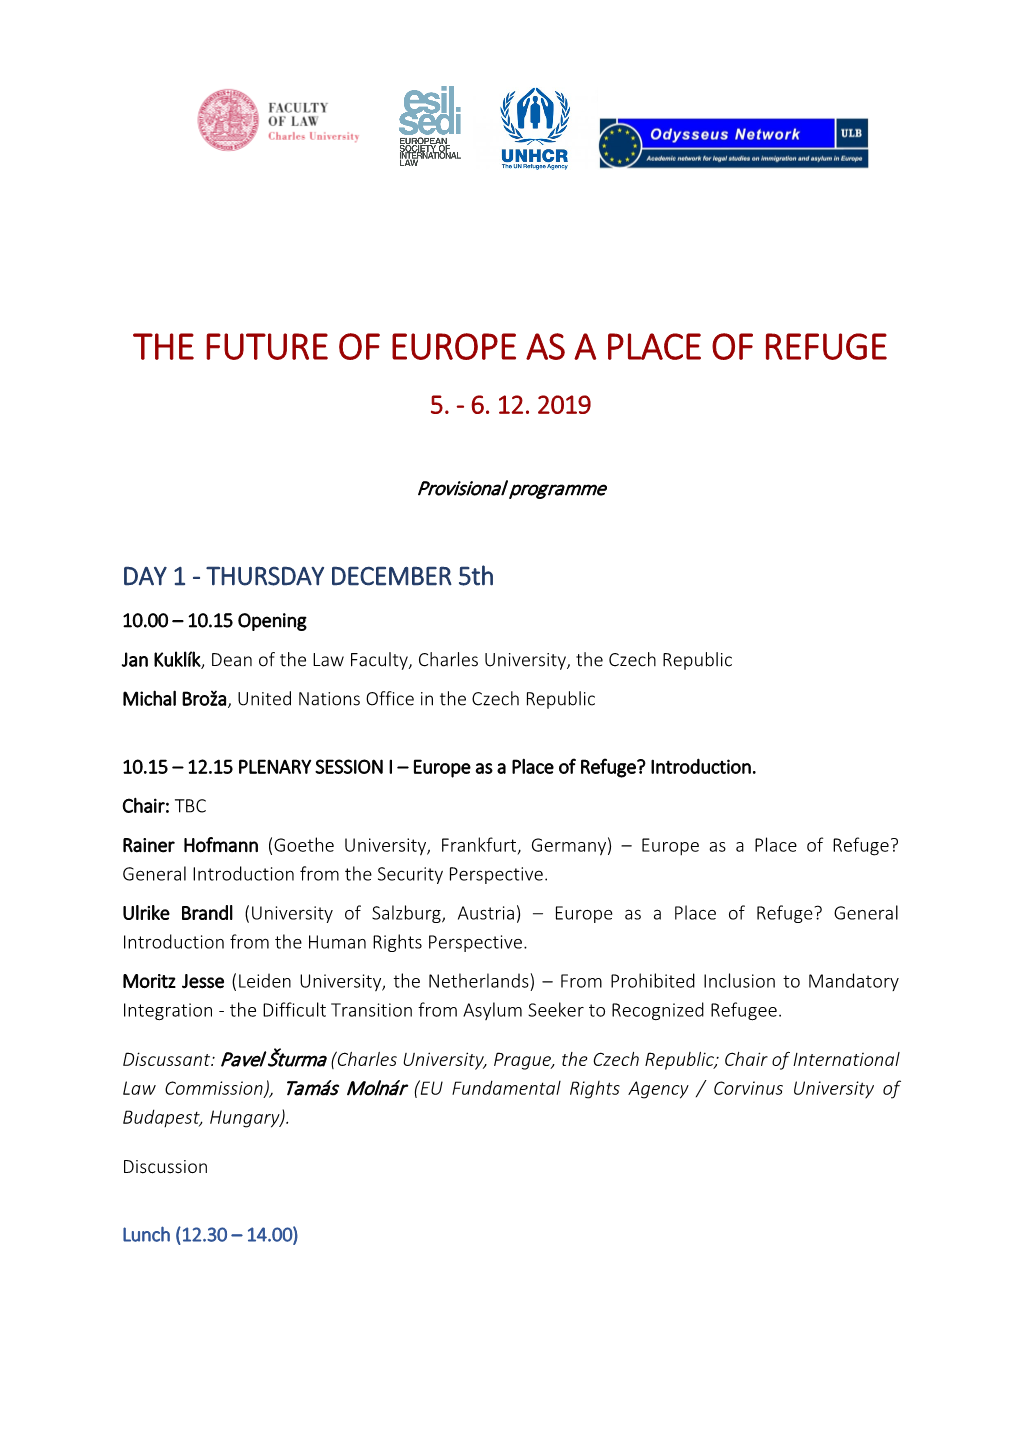 The Future of Europe As a Place of Refuge 5